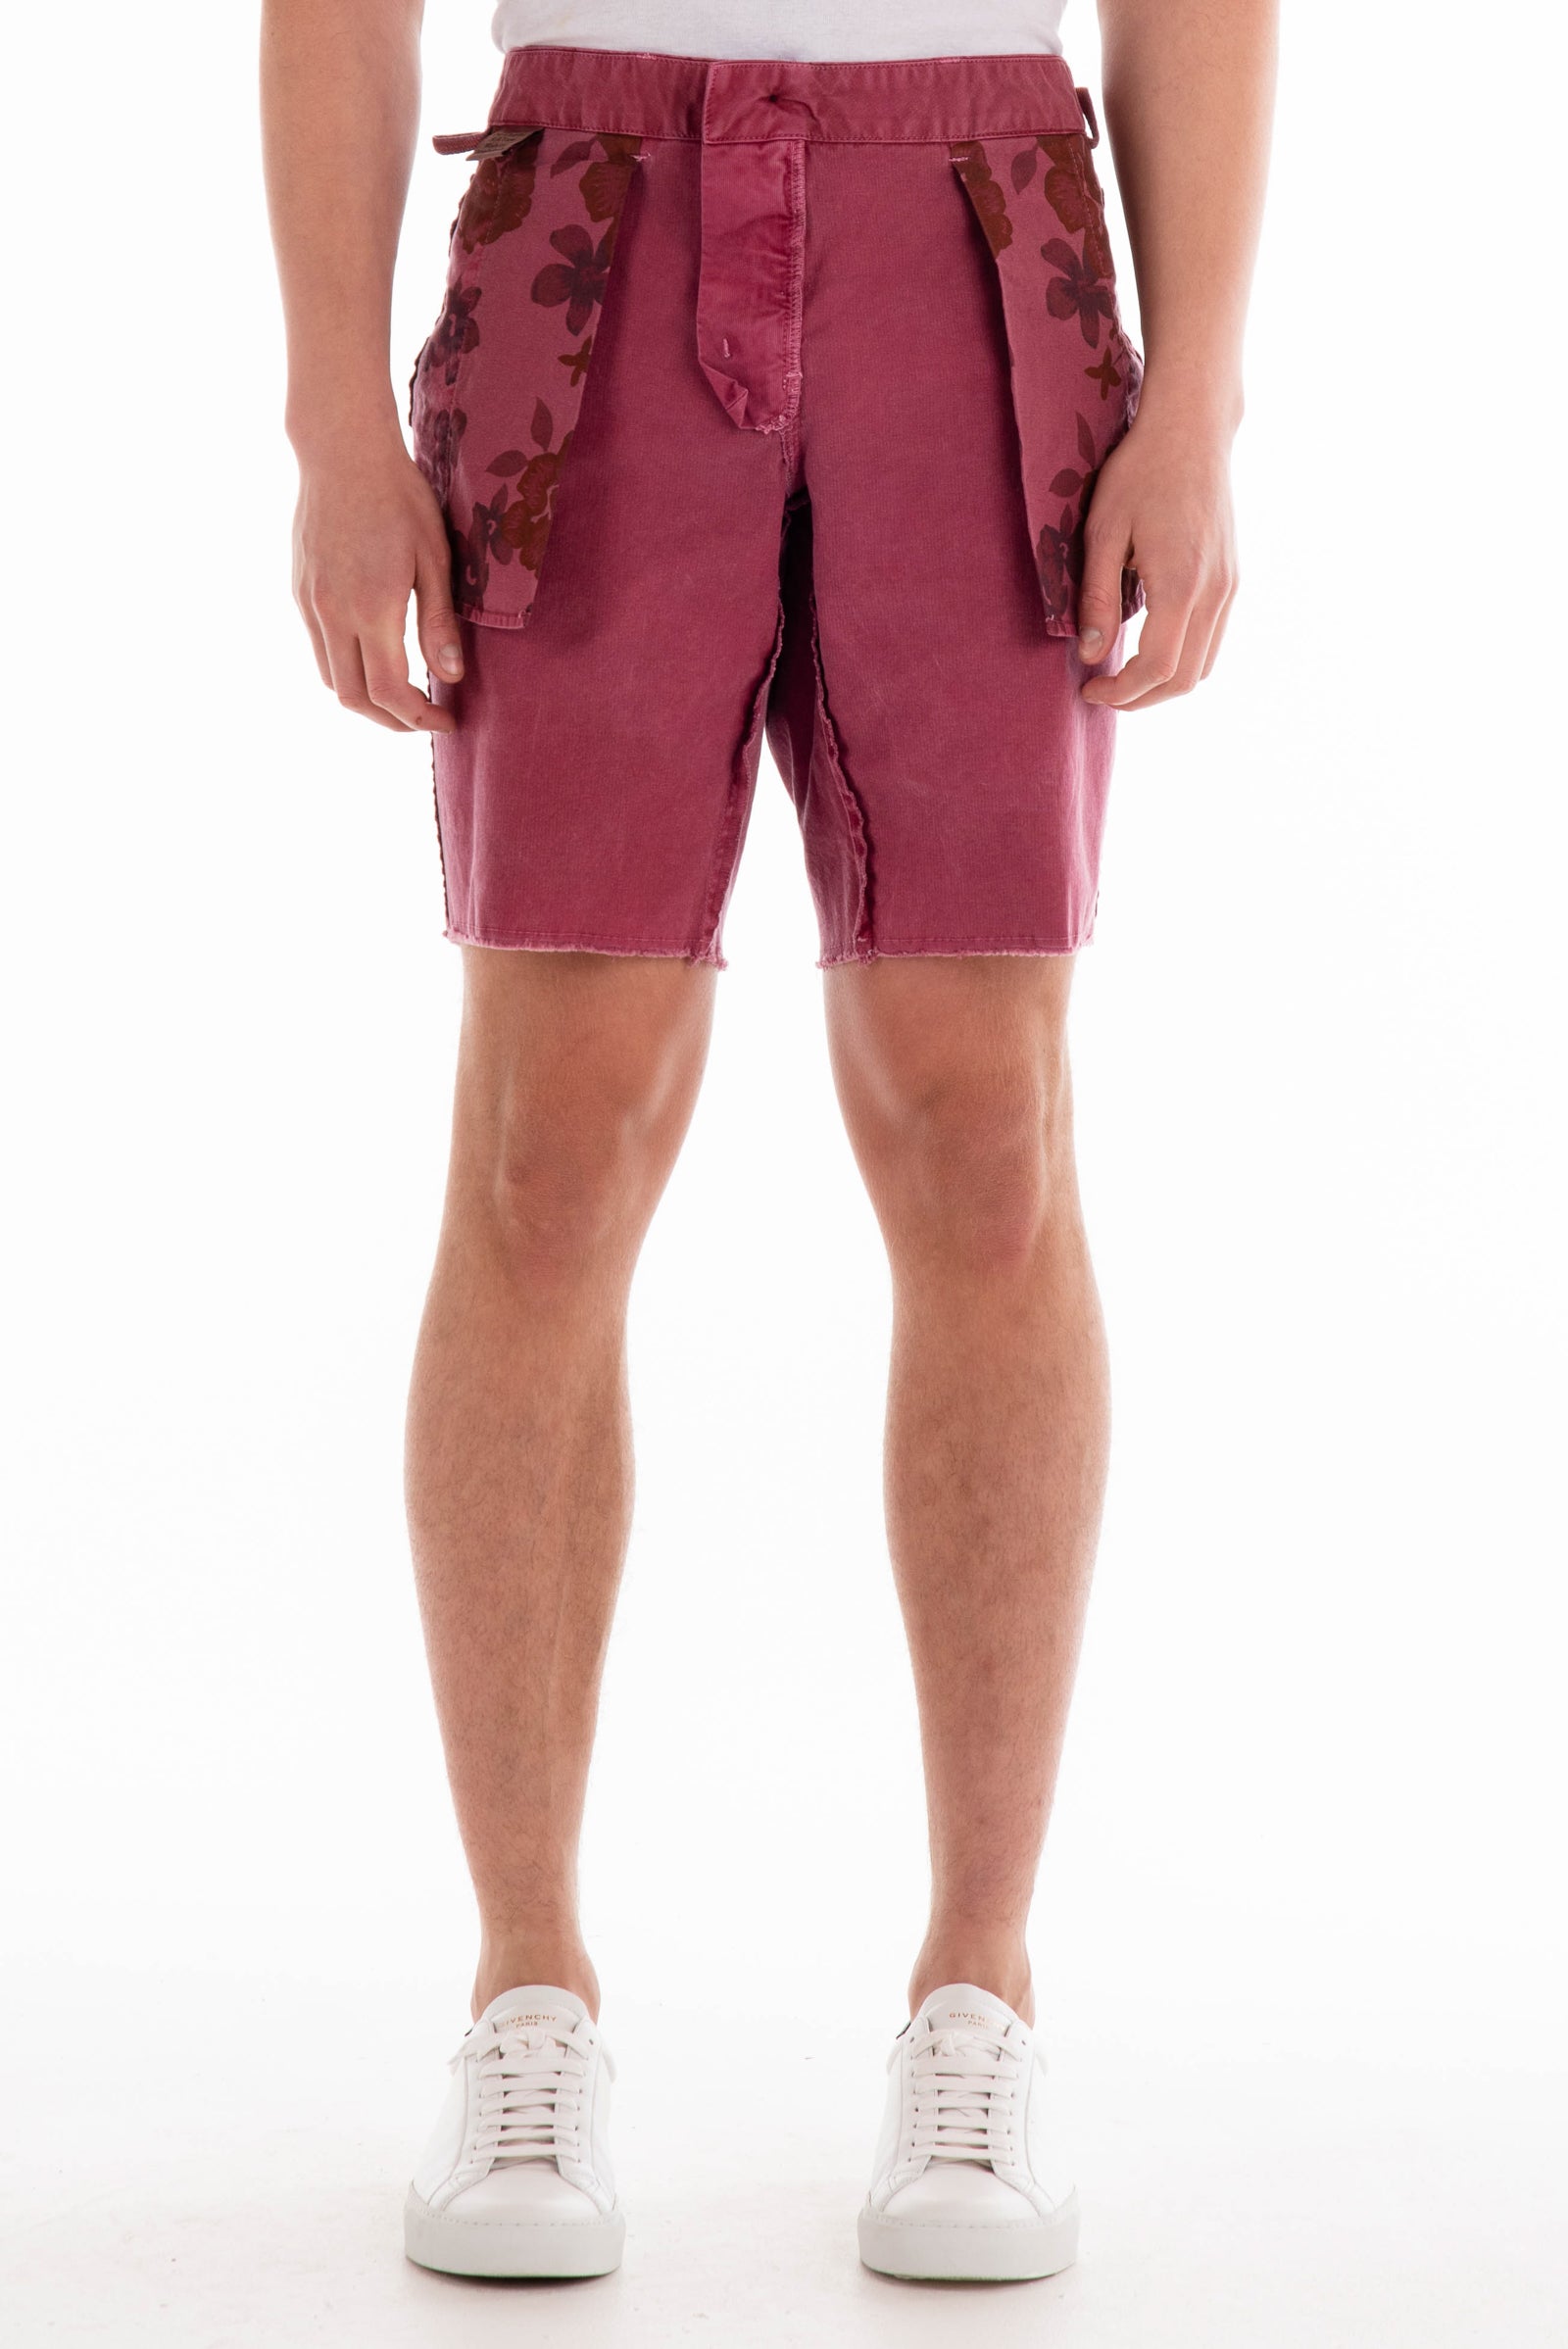 Original Paperbacks Rockland Chino Short in Crushed Berry on Model Cropped Inside Out Pocket Front View